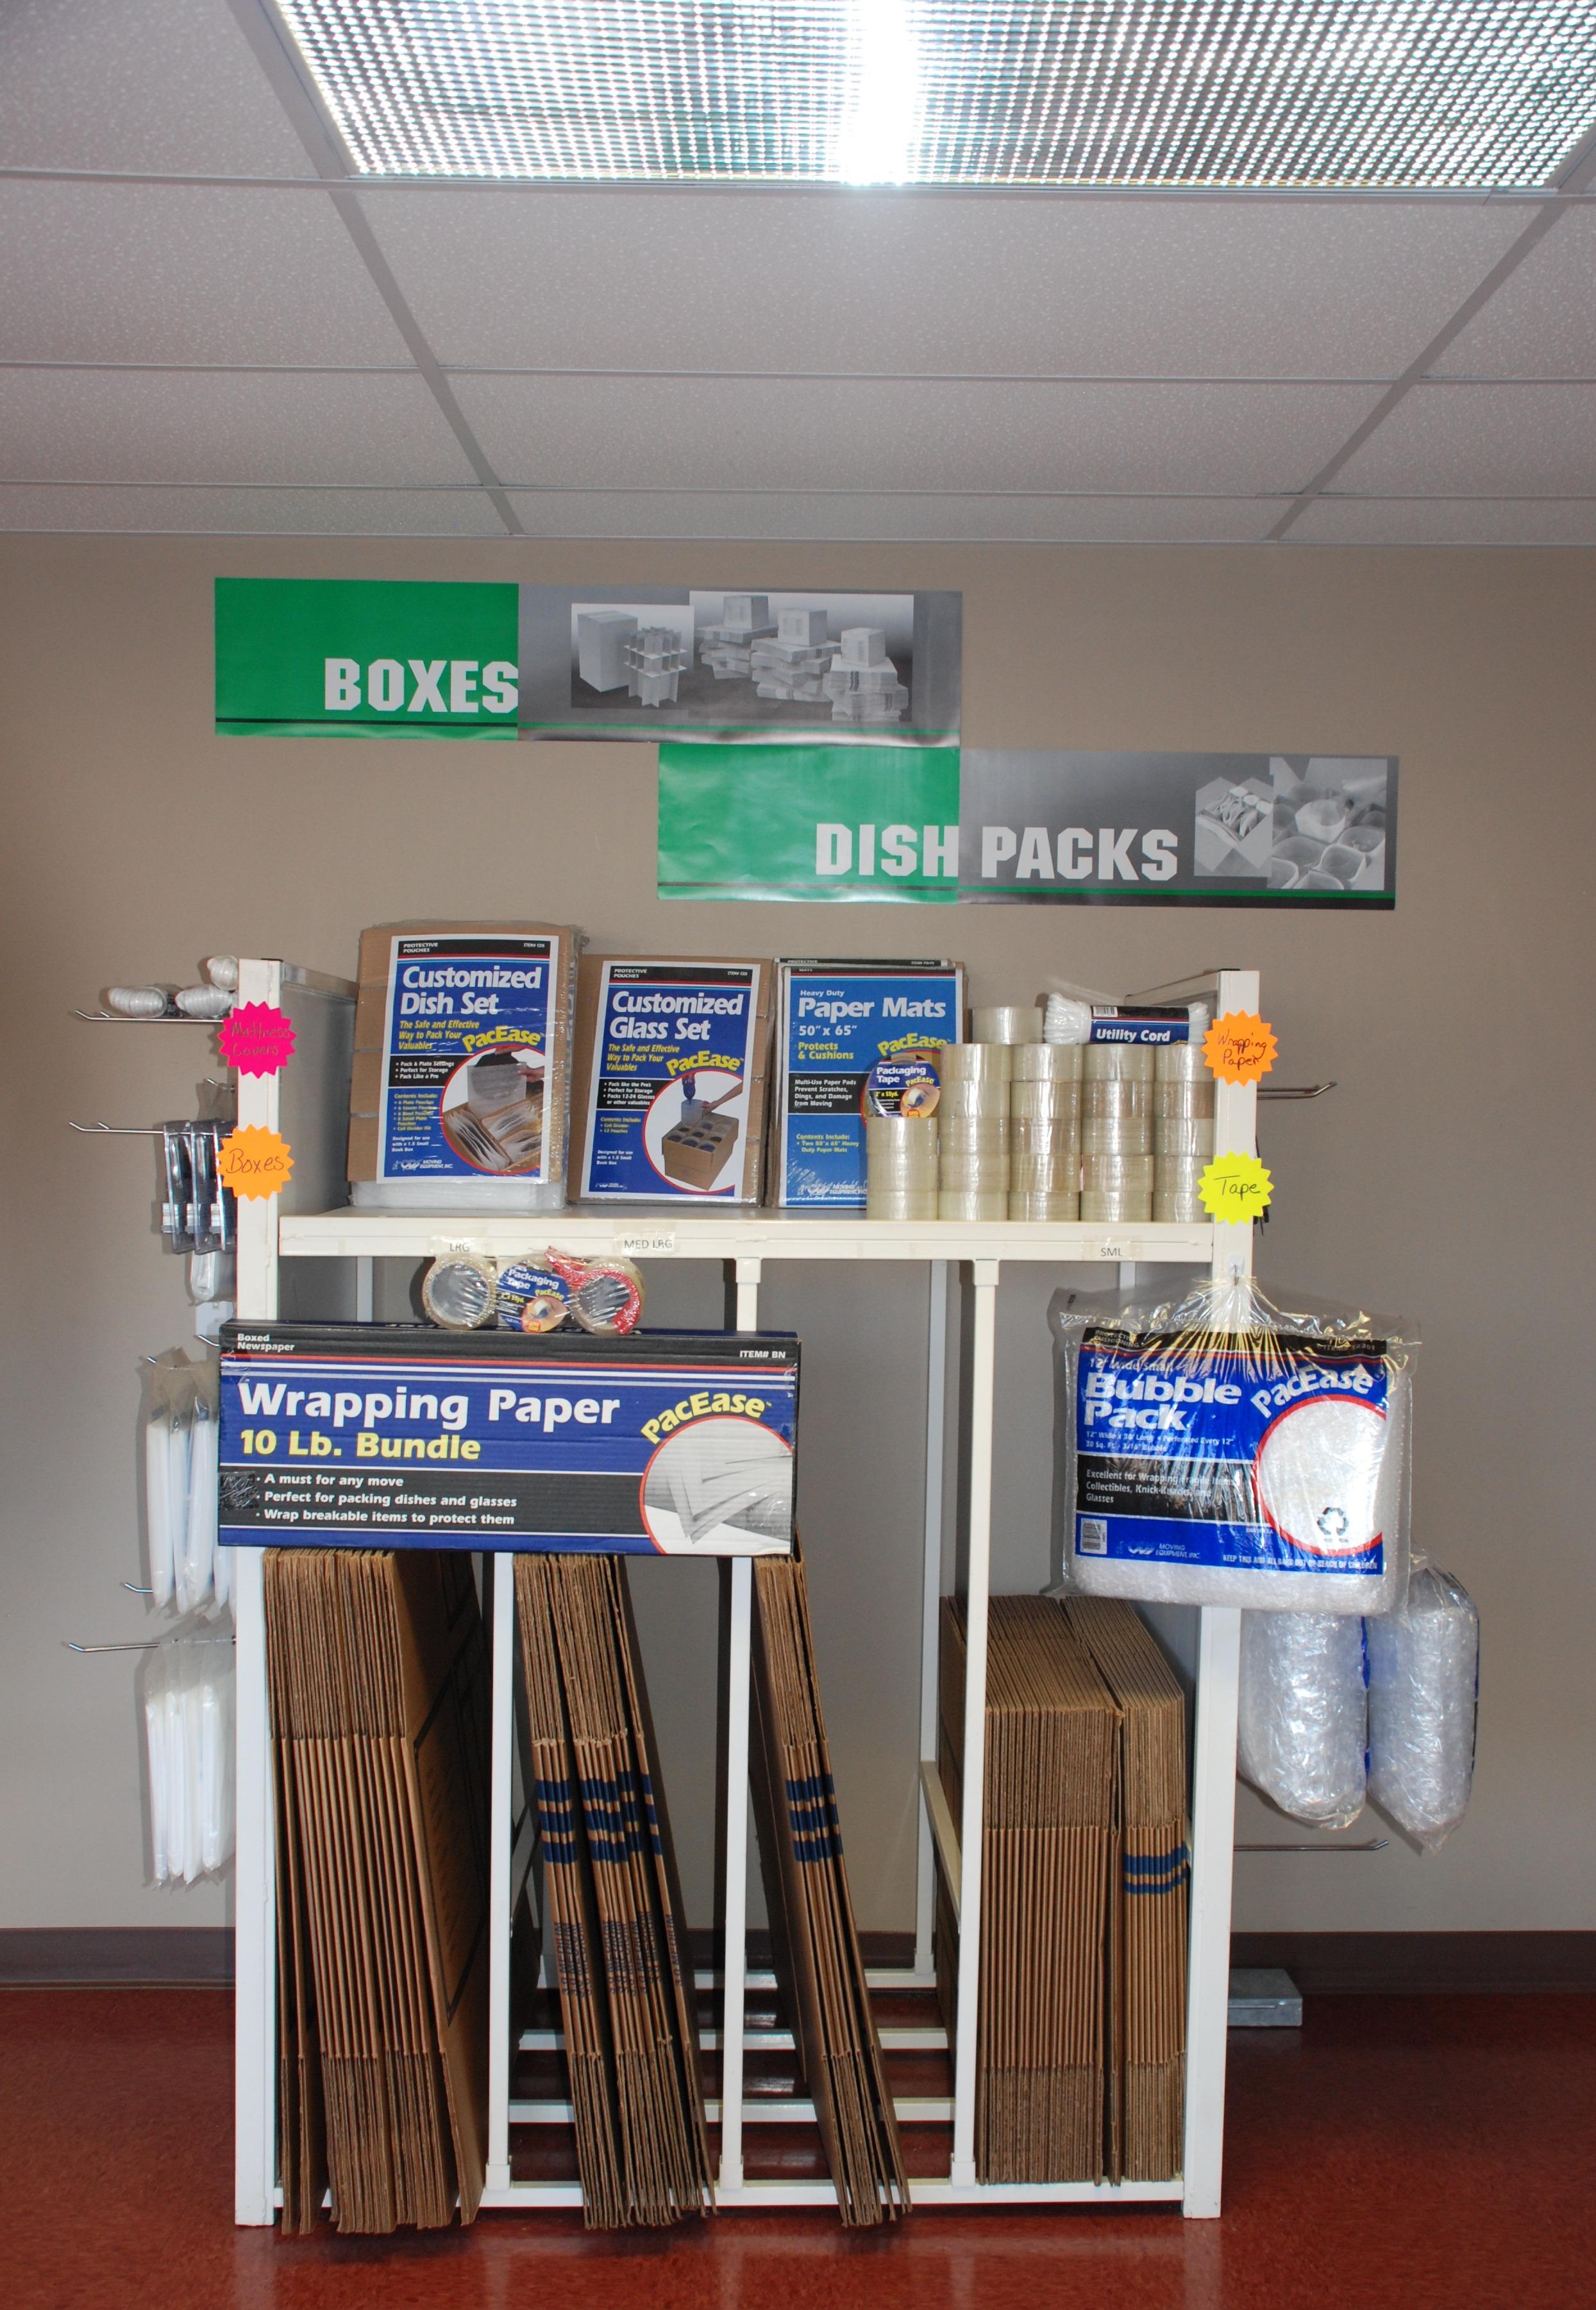 Stop by today to  pick up any boxes, locks or packing supplies.